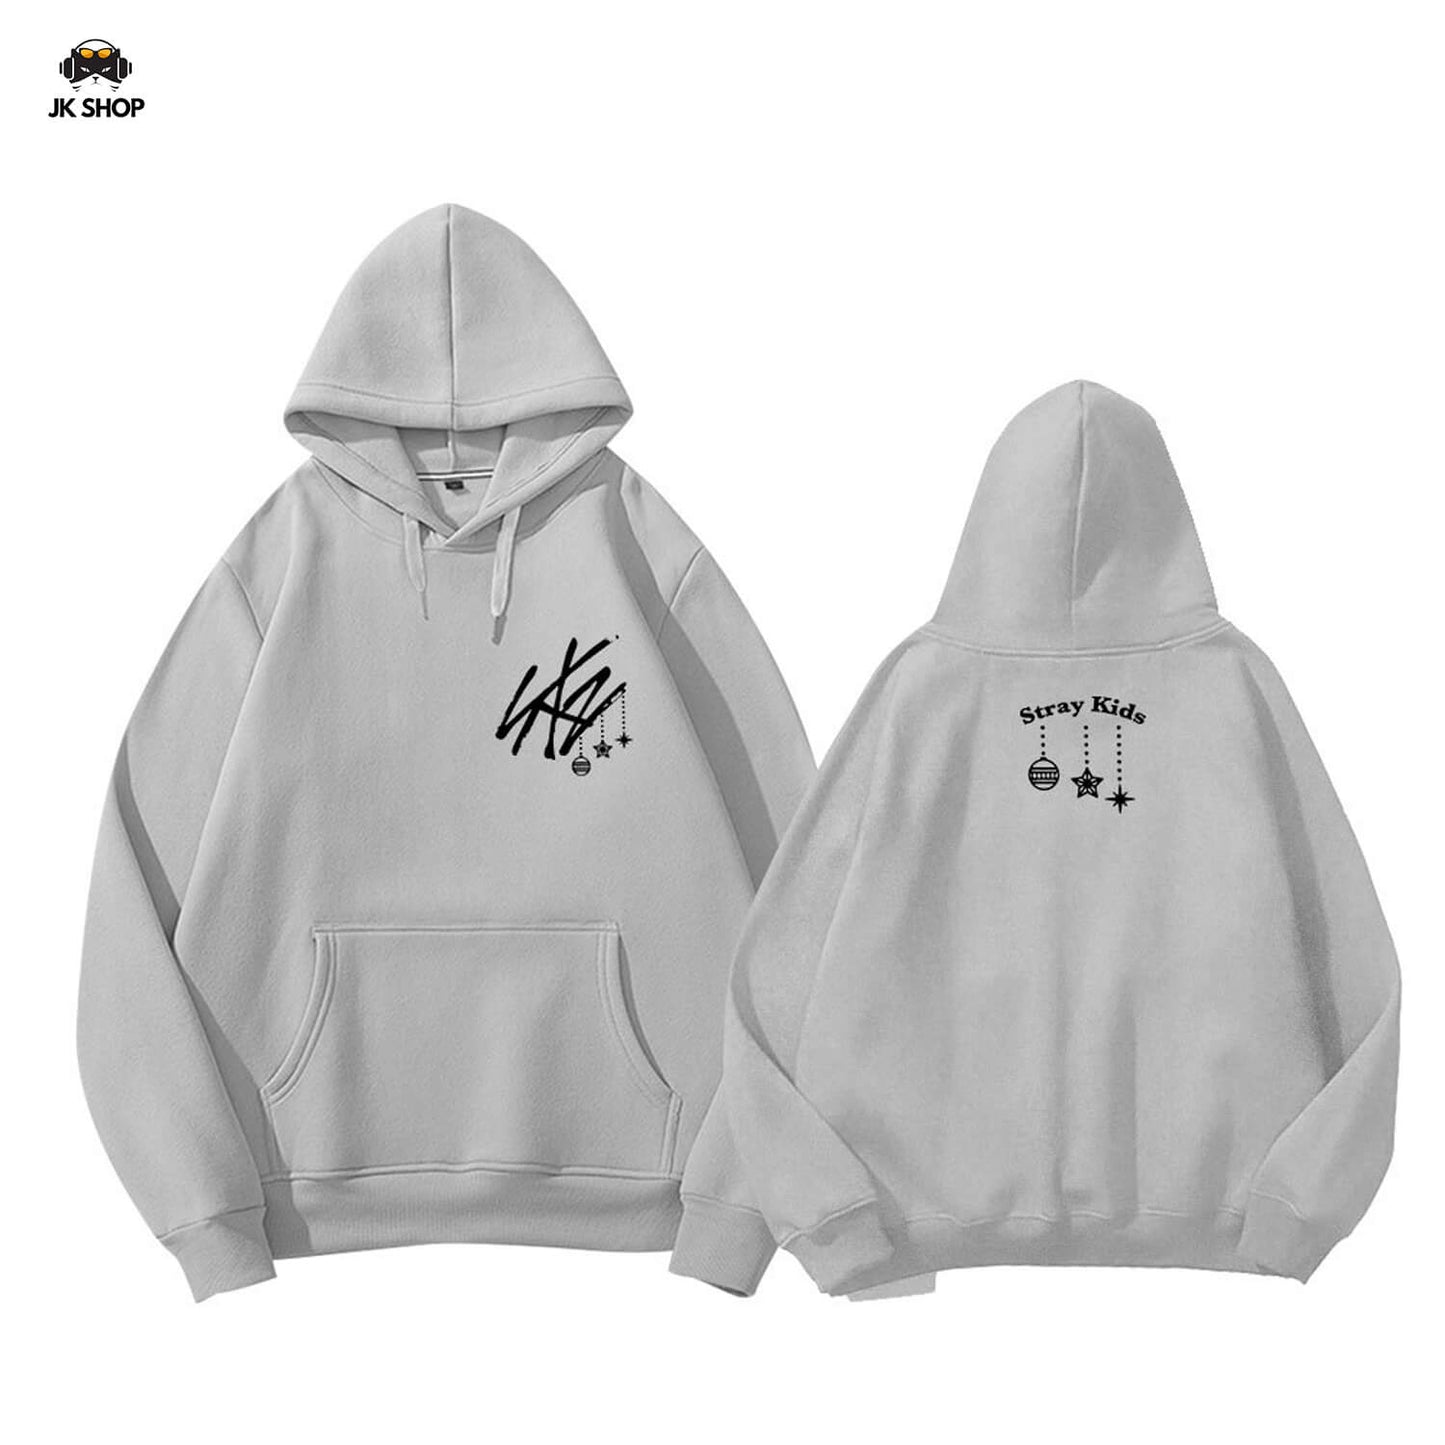 StrayKids Christmas Hoodie Collection 2